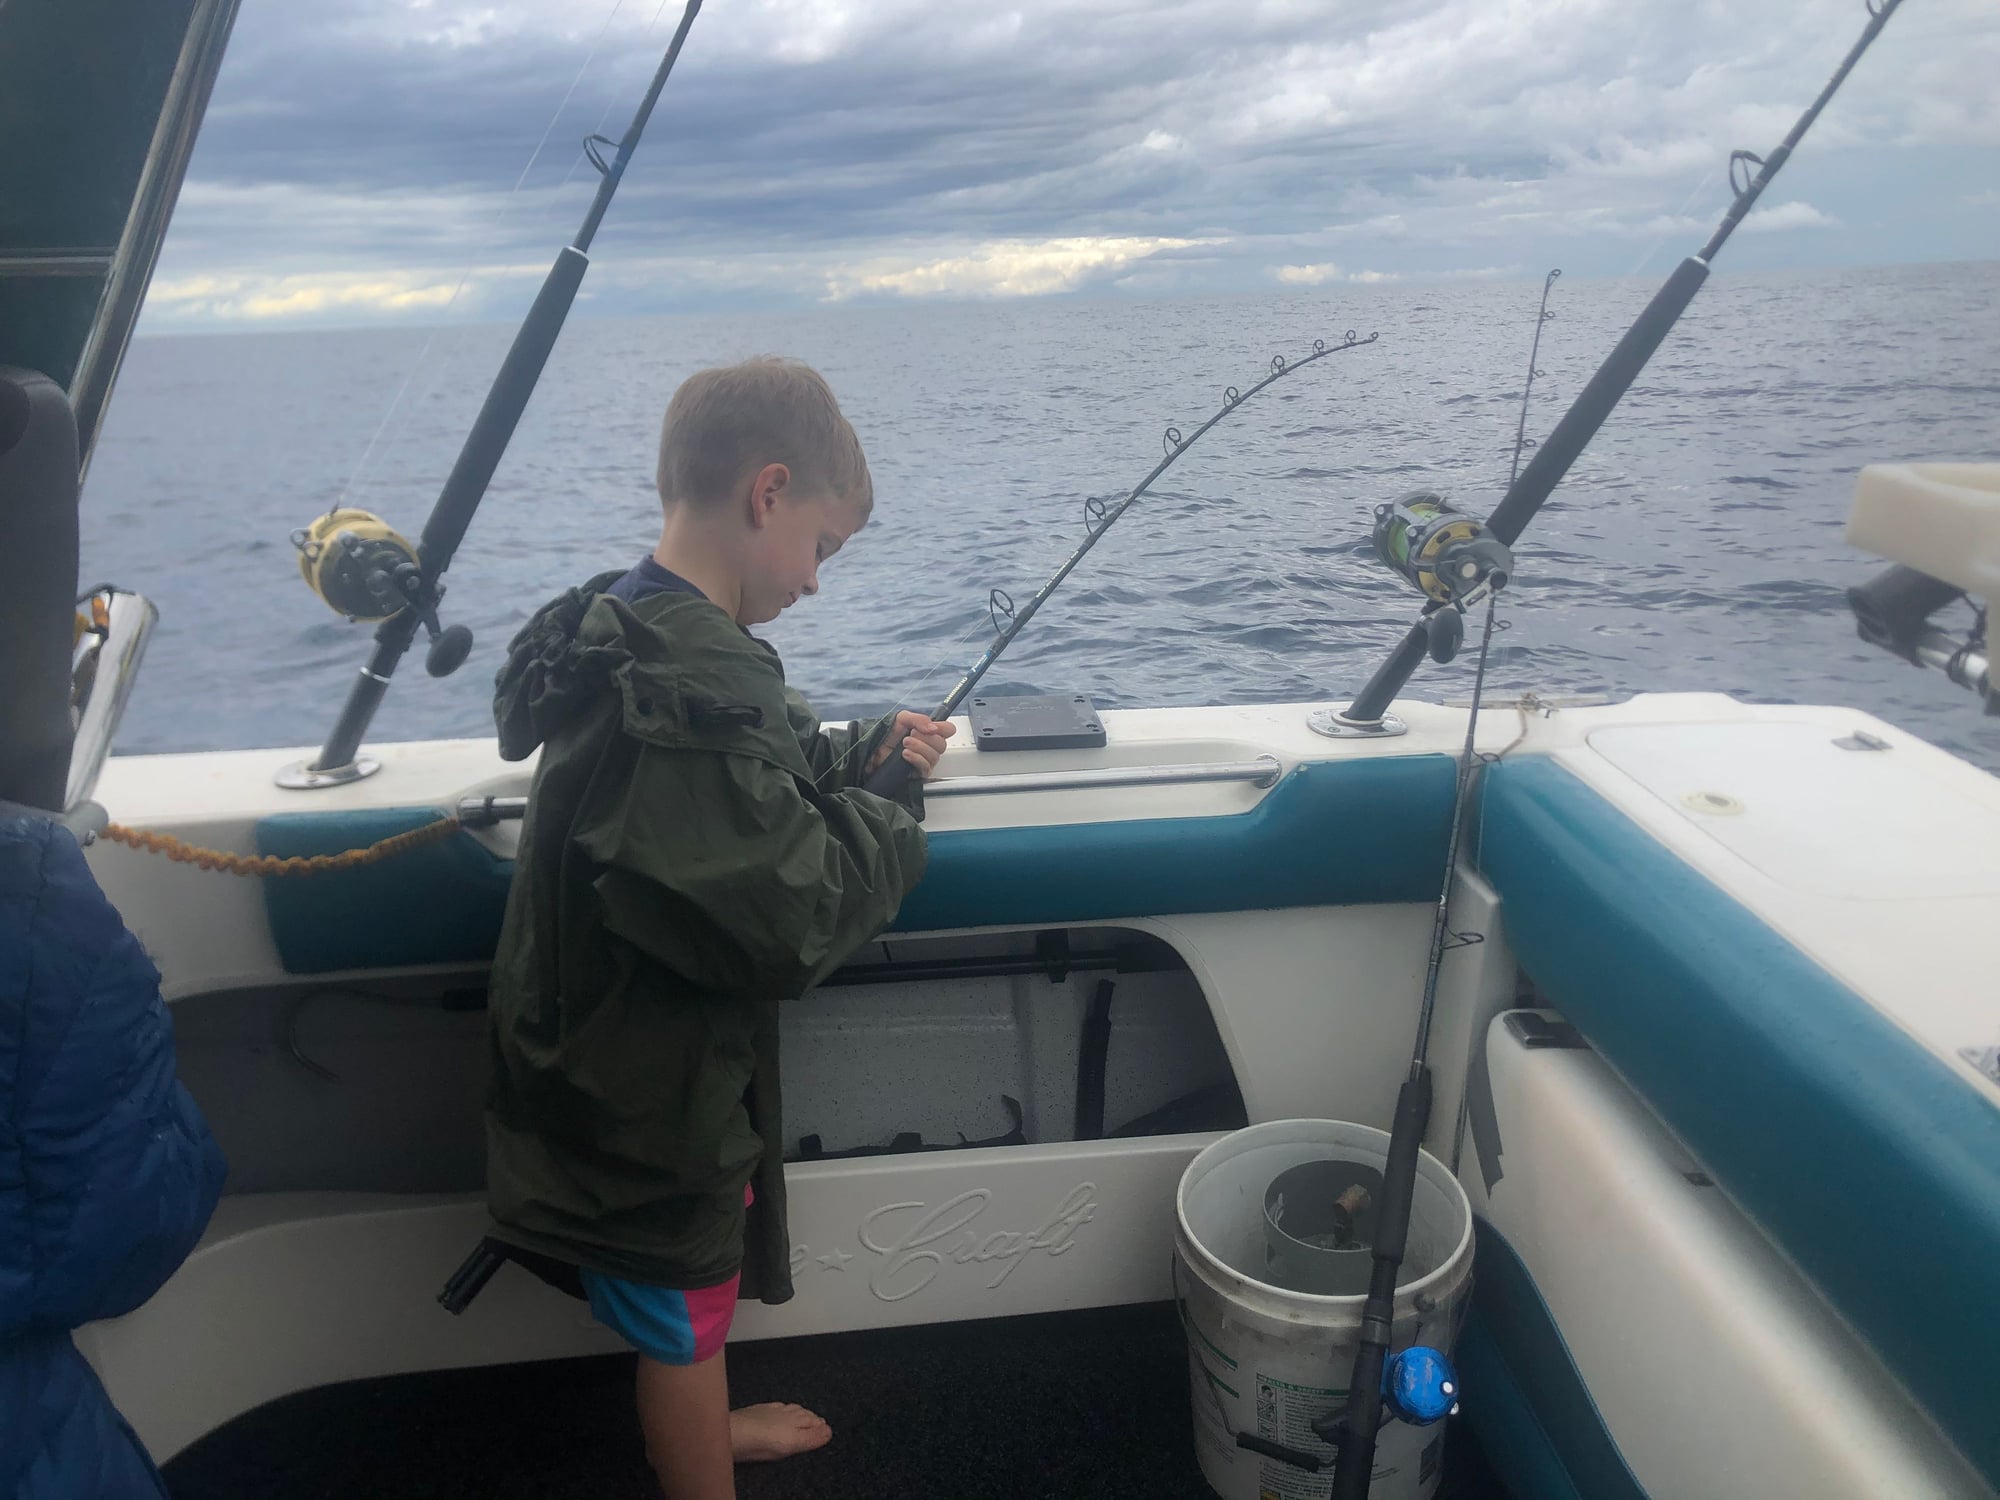 Best rod and reel for young kids? - The Hull Truth - Boating and Fishing  Forum